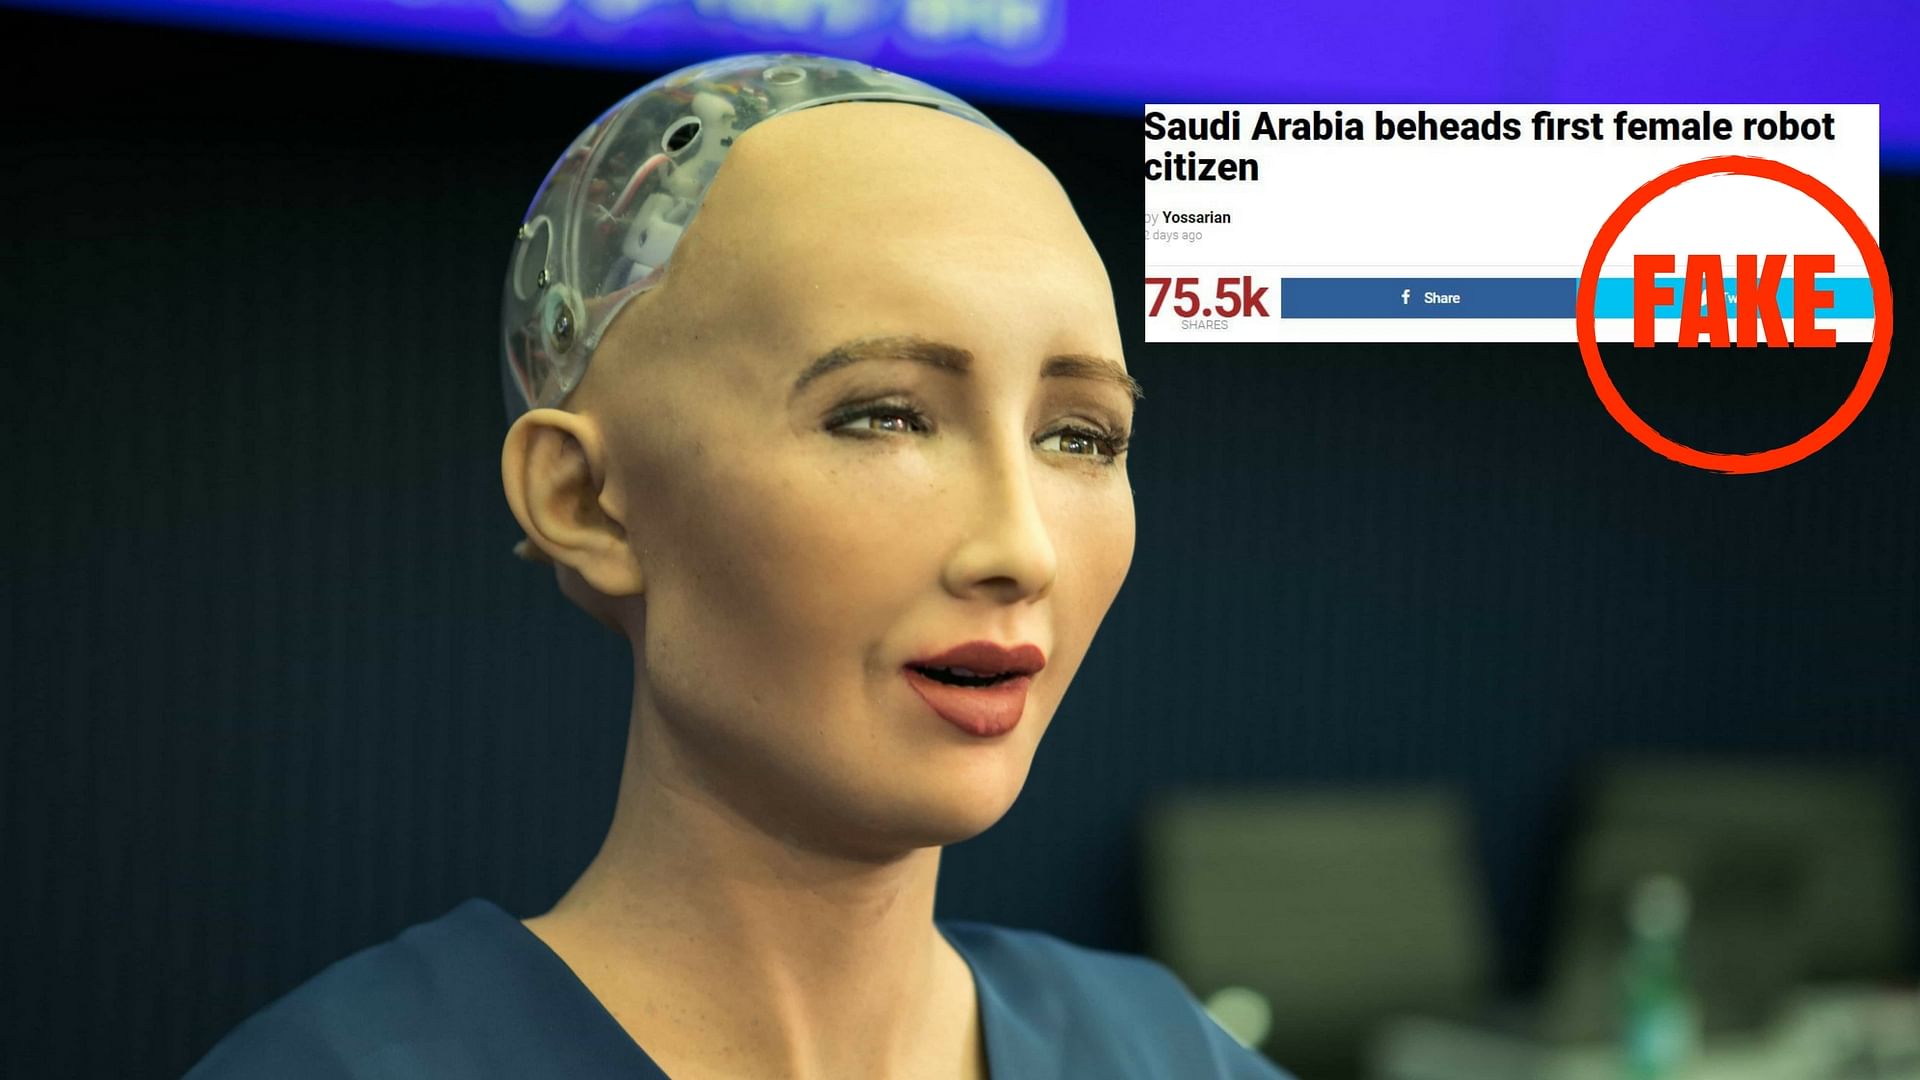 No, Saudi Arabia did not behead a female robot because she didn’t cover her head in public and appear without a male guardian.